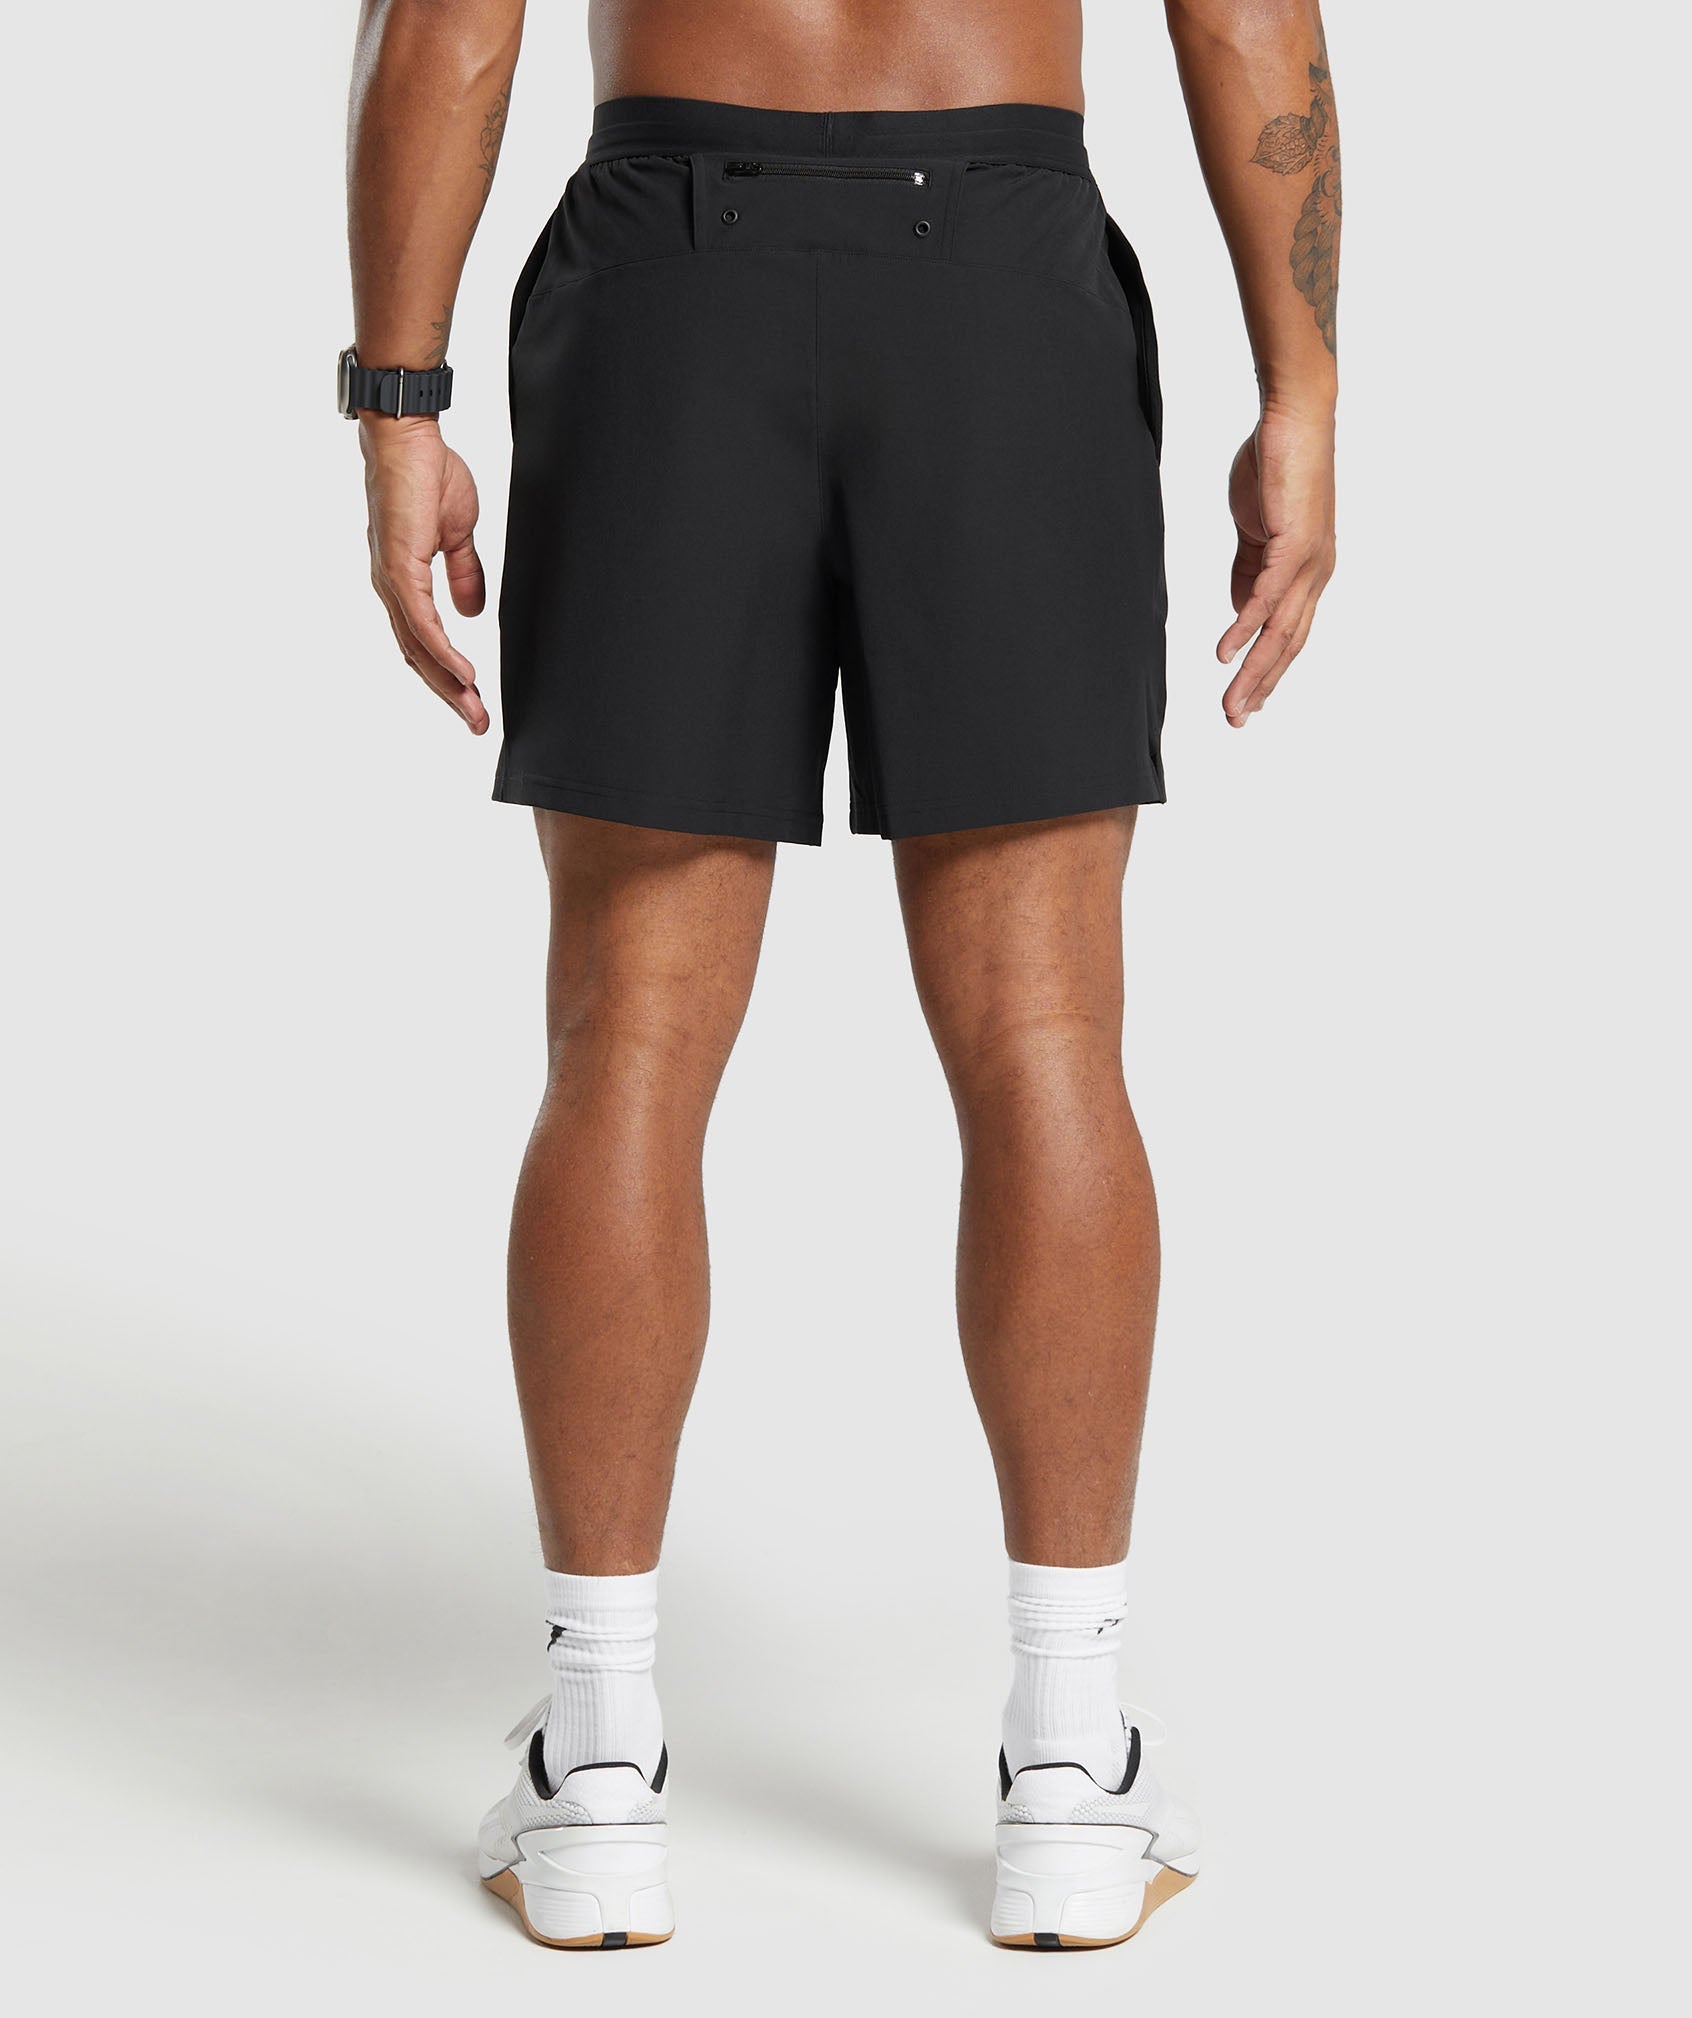 Land to Water 6" Shorts in Black - view 2